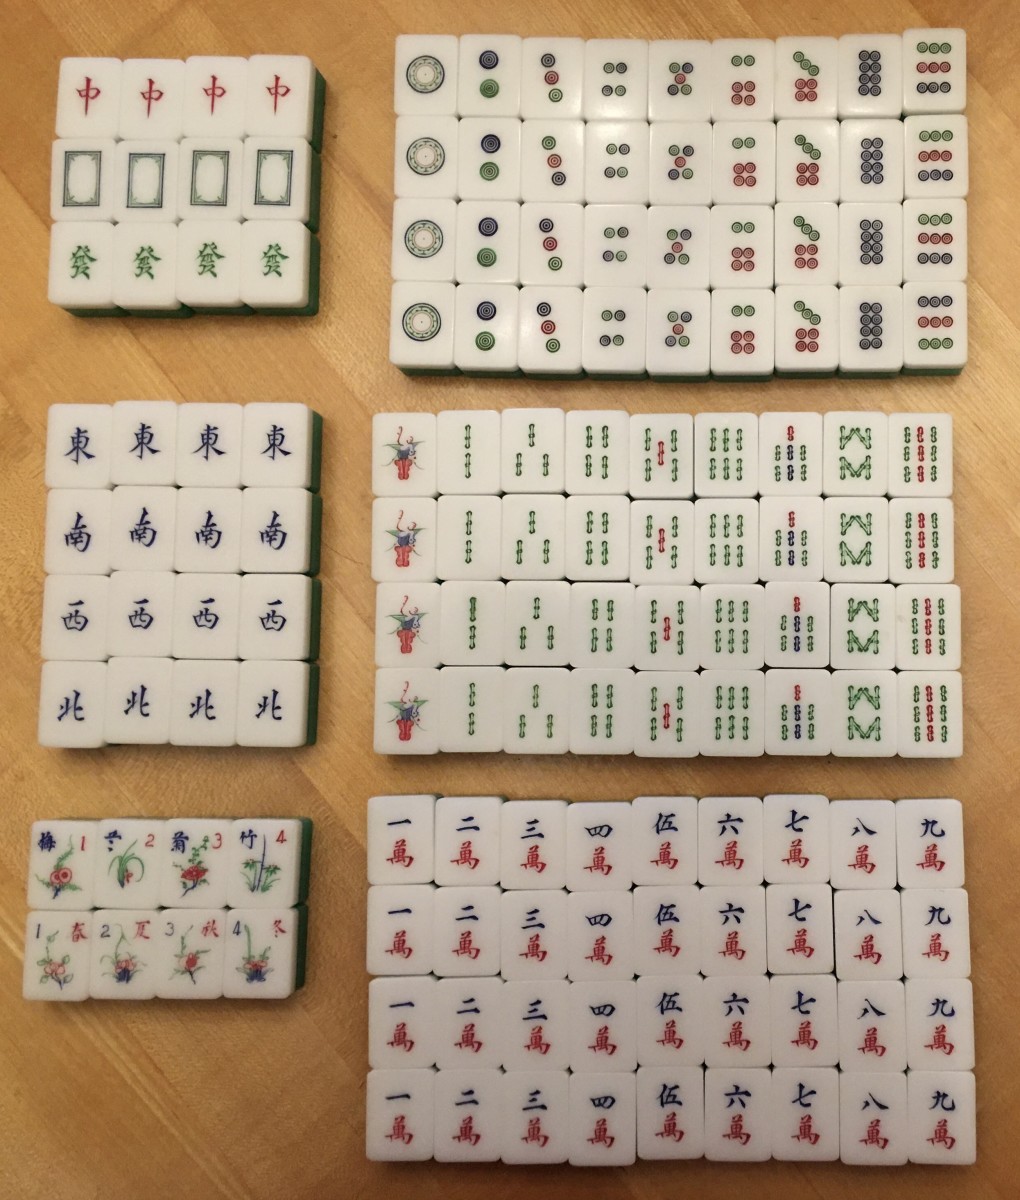 Chinese mahjong cards separated by category on a wooden desk